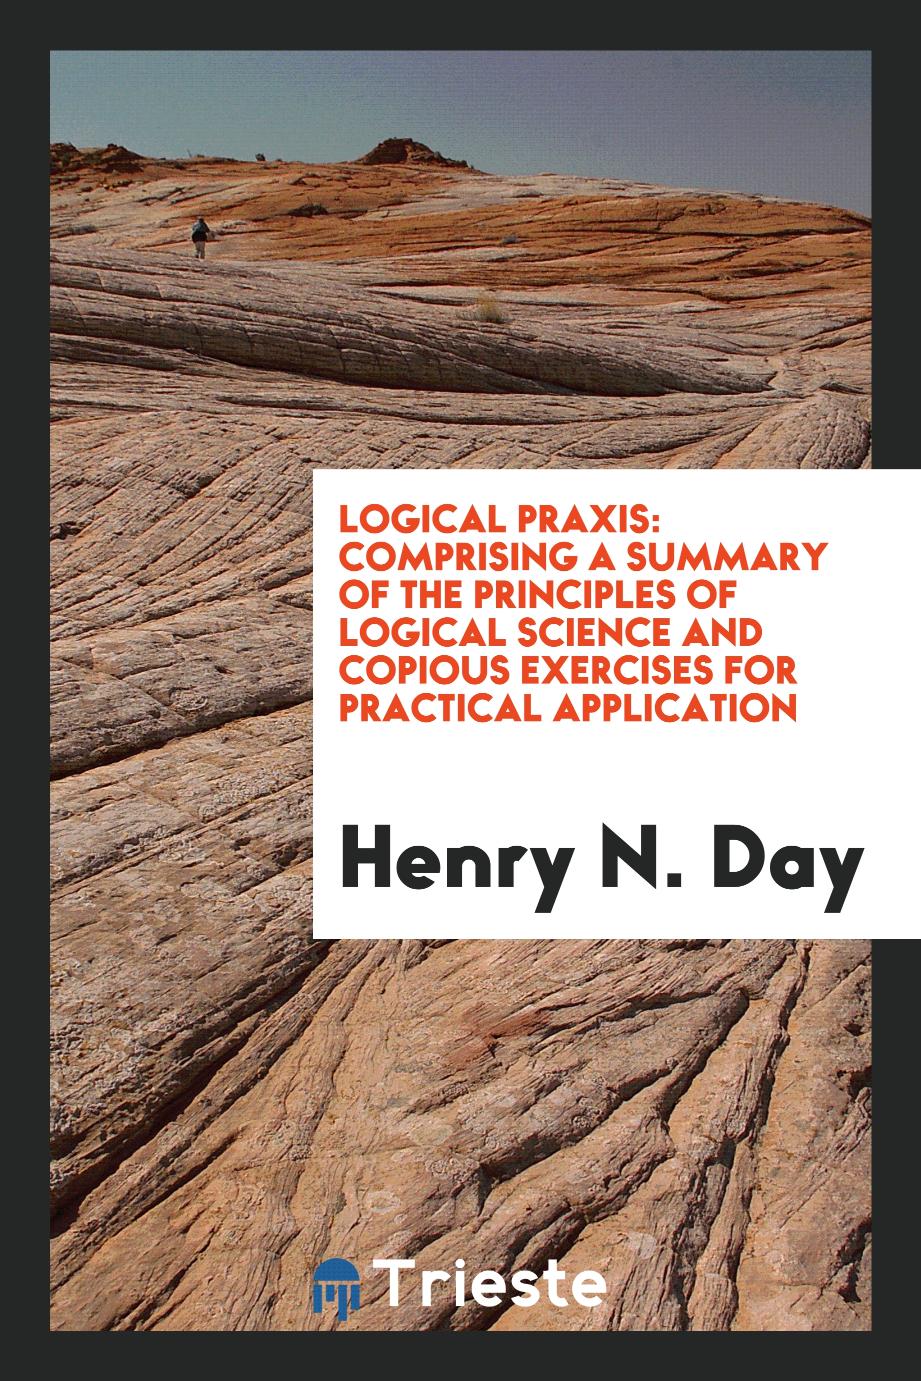 Logical Praxis: Comprising a Summary of the Principles of Logical Science and Copious Exercises for Practical Application